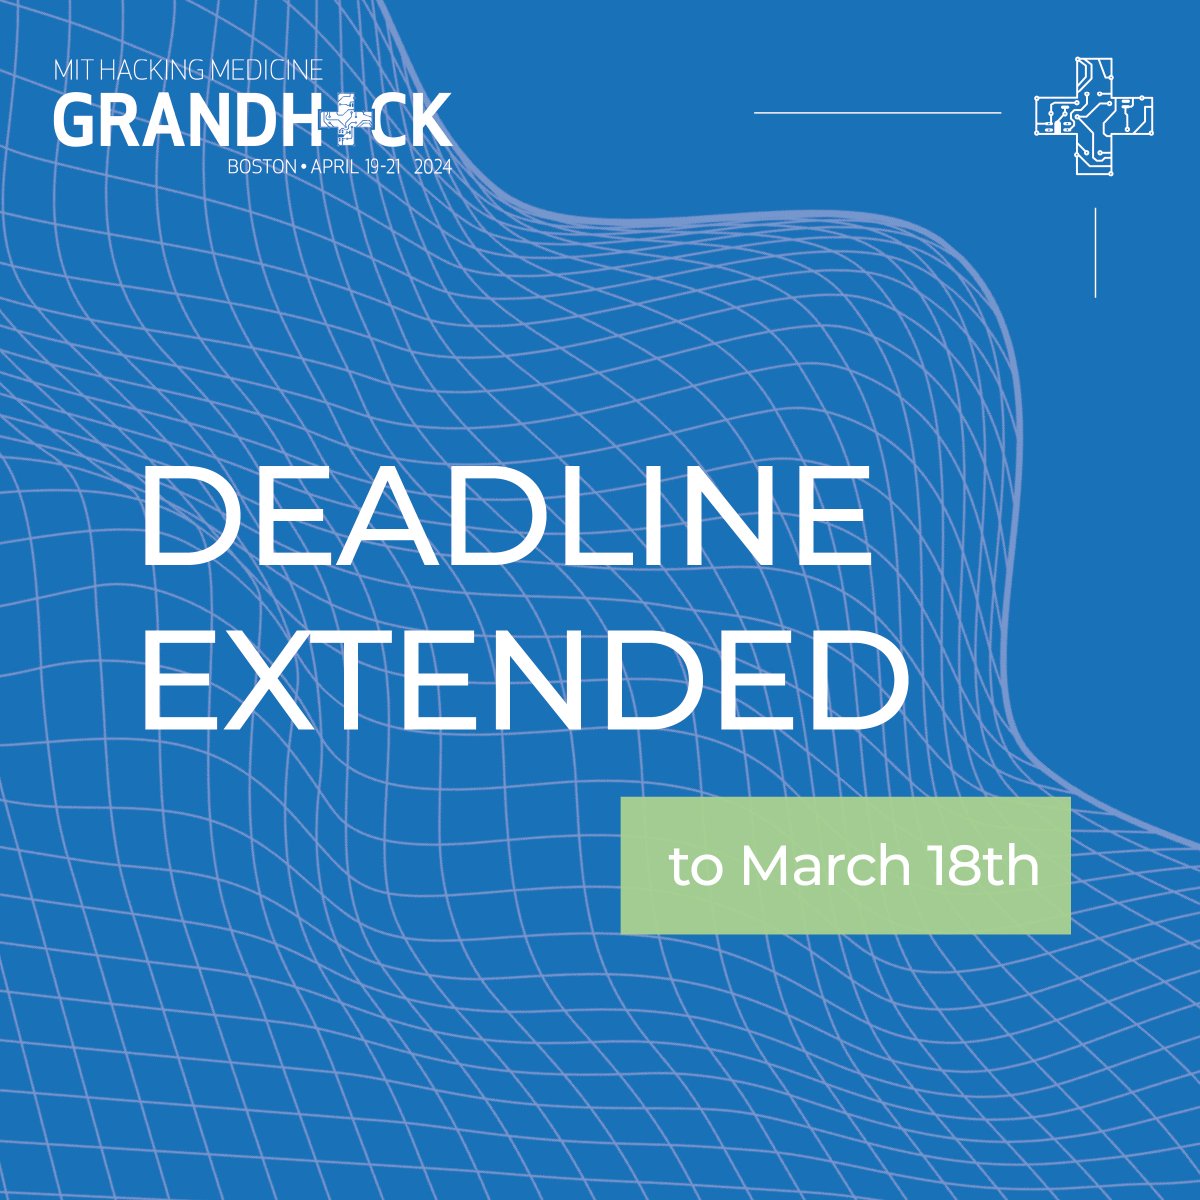 🚀🕒 Deadline extended! 🚀🕒 Apply by Monday, March 18th! Don’t miss out on #GrandHack24 - where innovation meets healthcare! 🌟Join us April 19th - 21st in Cambridge, MA! #GrandHack #MIT #Innovation #Hackathon #ApplyNow #healthcare #healthtech #medicine